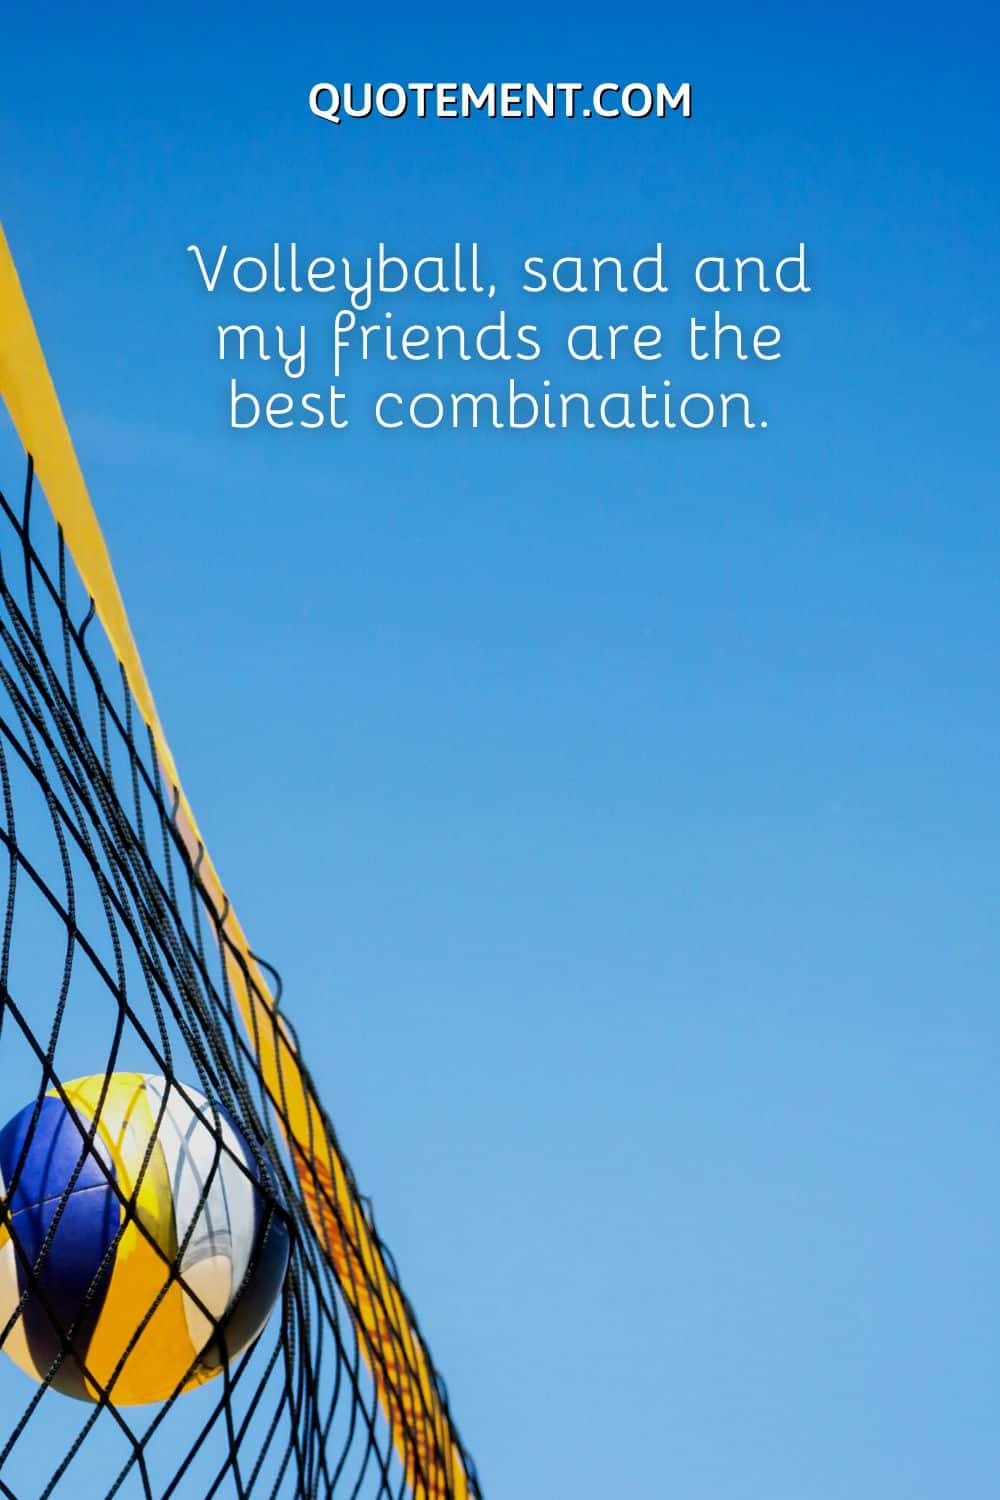 Volleyball, sand and my friends are the best combination.